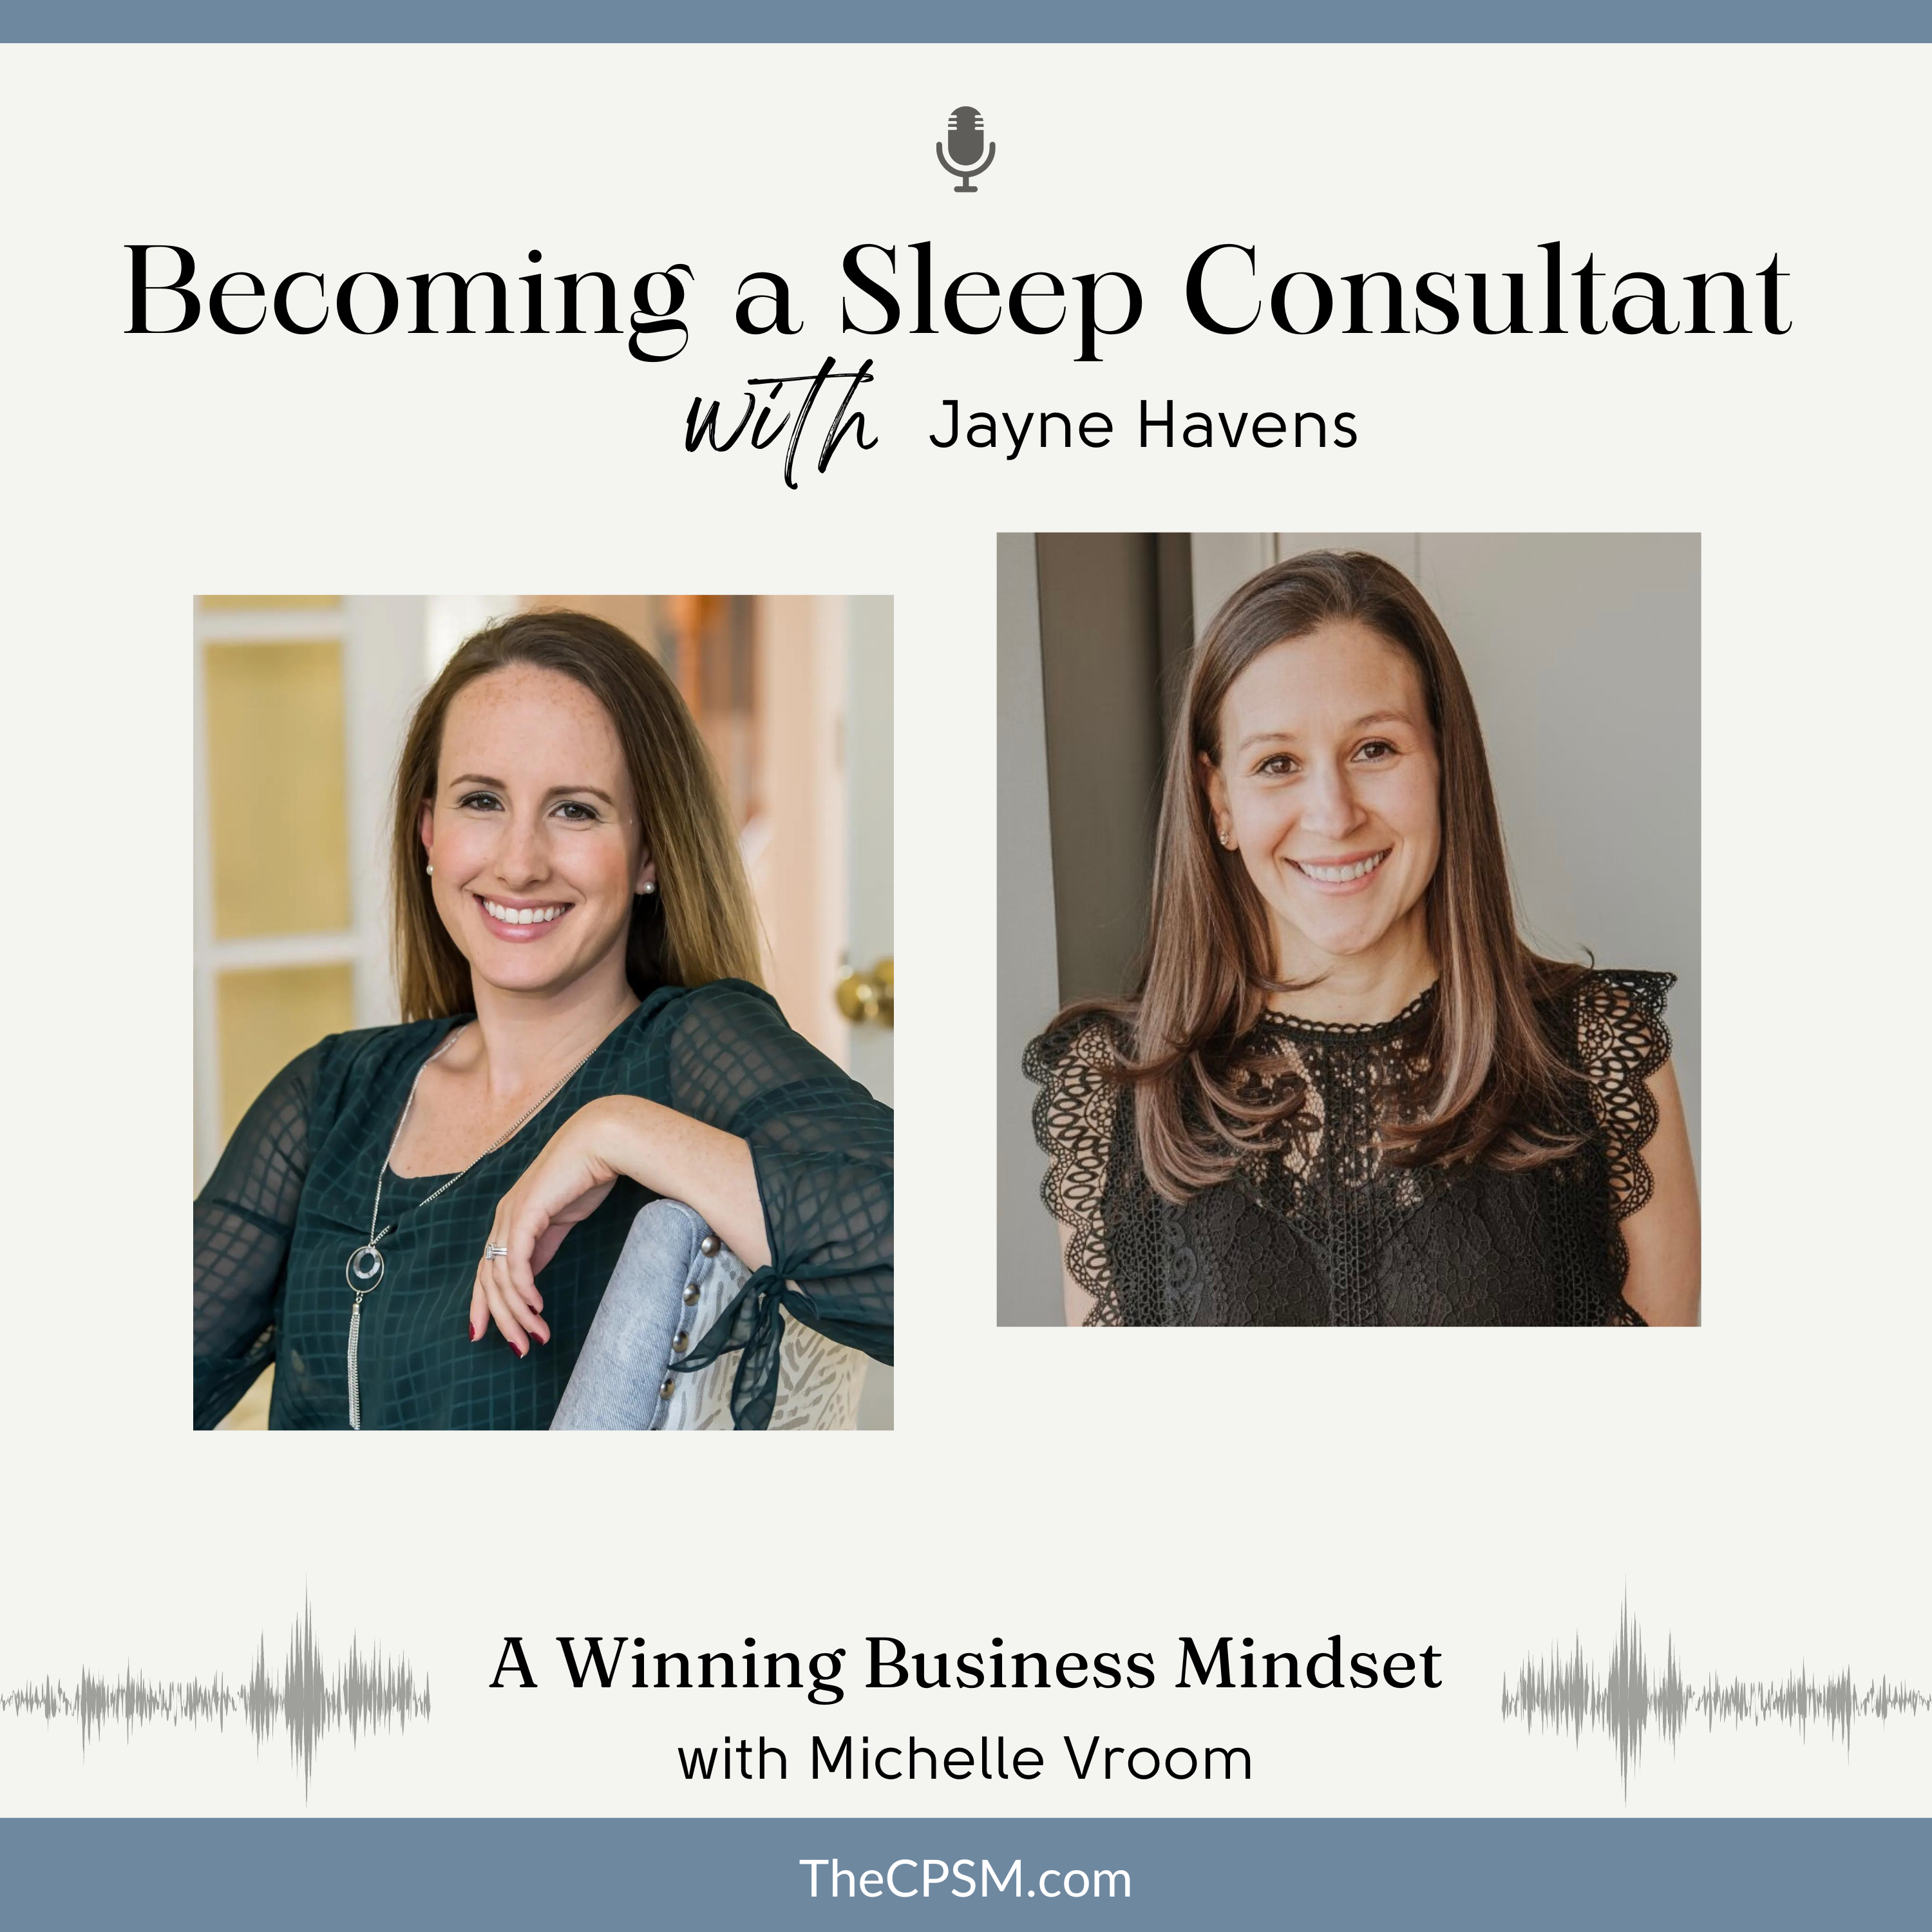 A Winning Business Mindset with Michelle Vroom